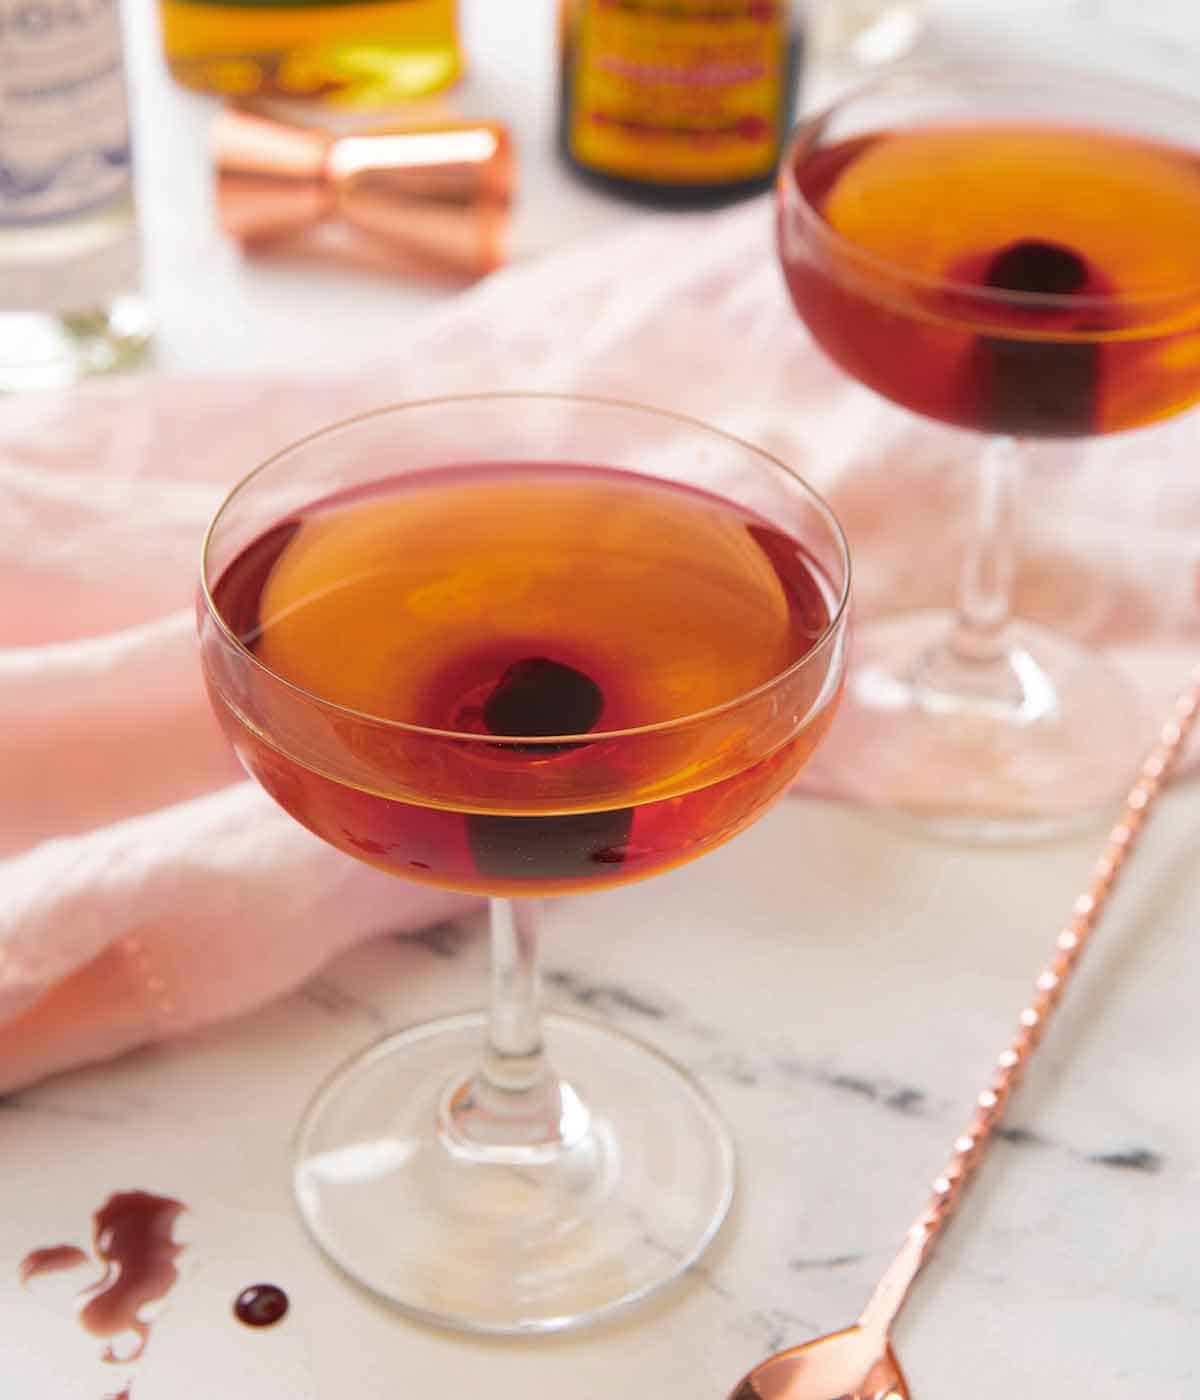 Two glasses of Manhattan cocktails with a maraschino cherry in each. Both drinks are in front of a pink linen napkin with a cocktail stirrer.